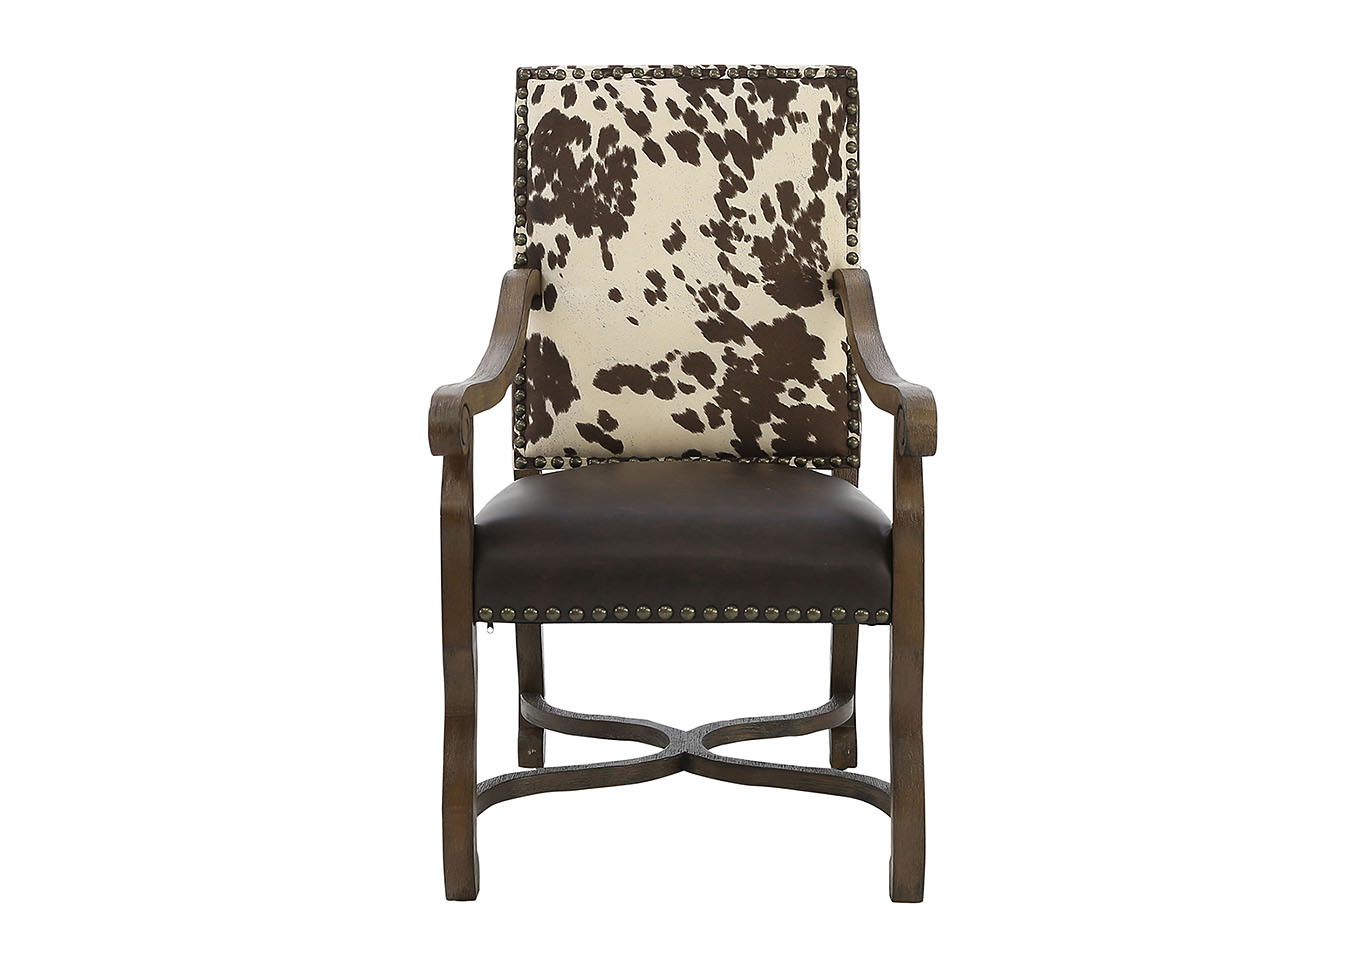 Mesquite Ranch Leather Faux Cowhide Armchair Ivan Smith Furniture